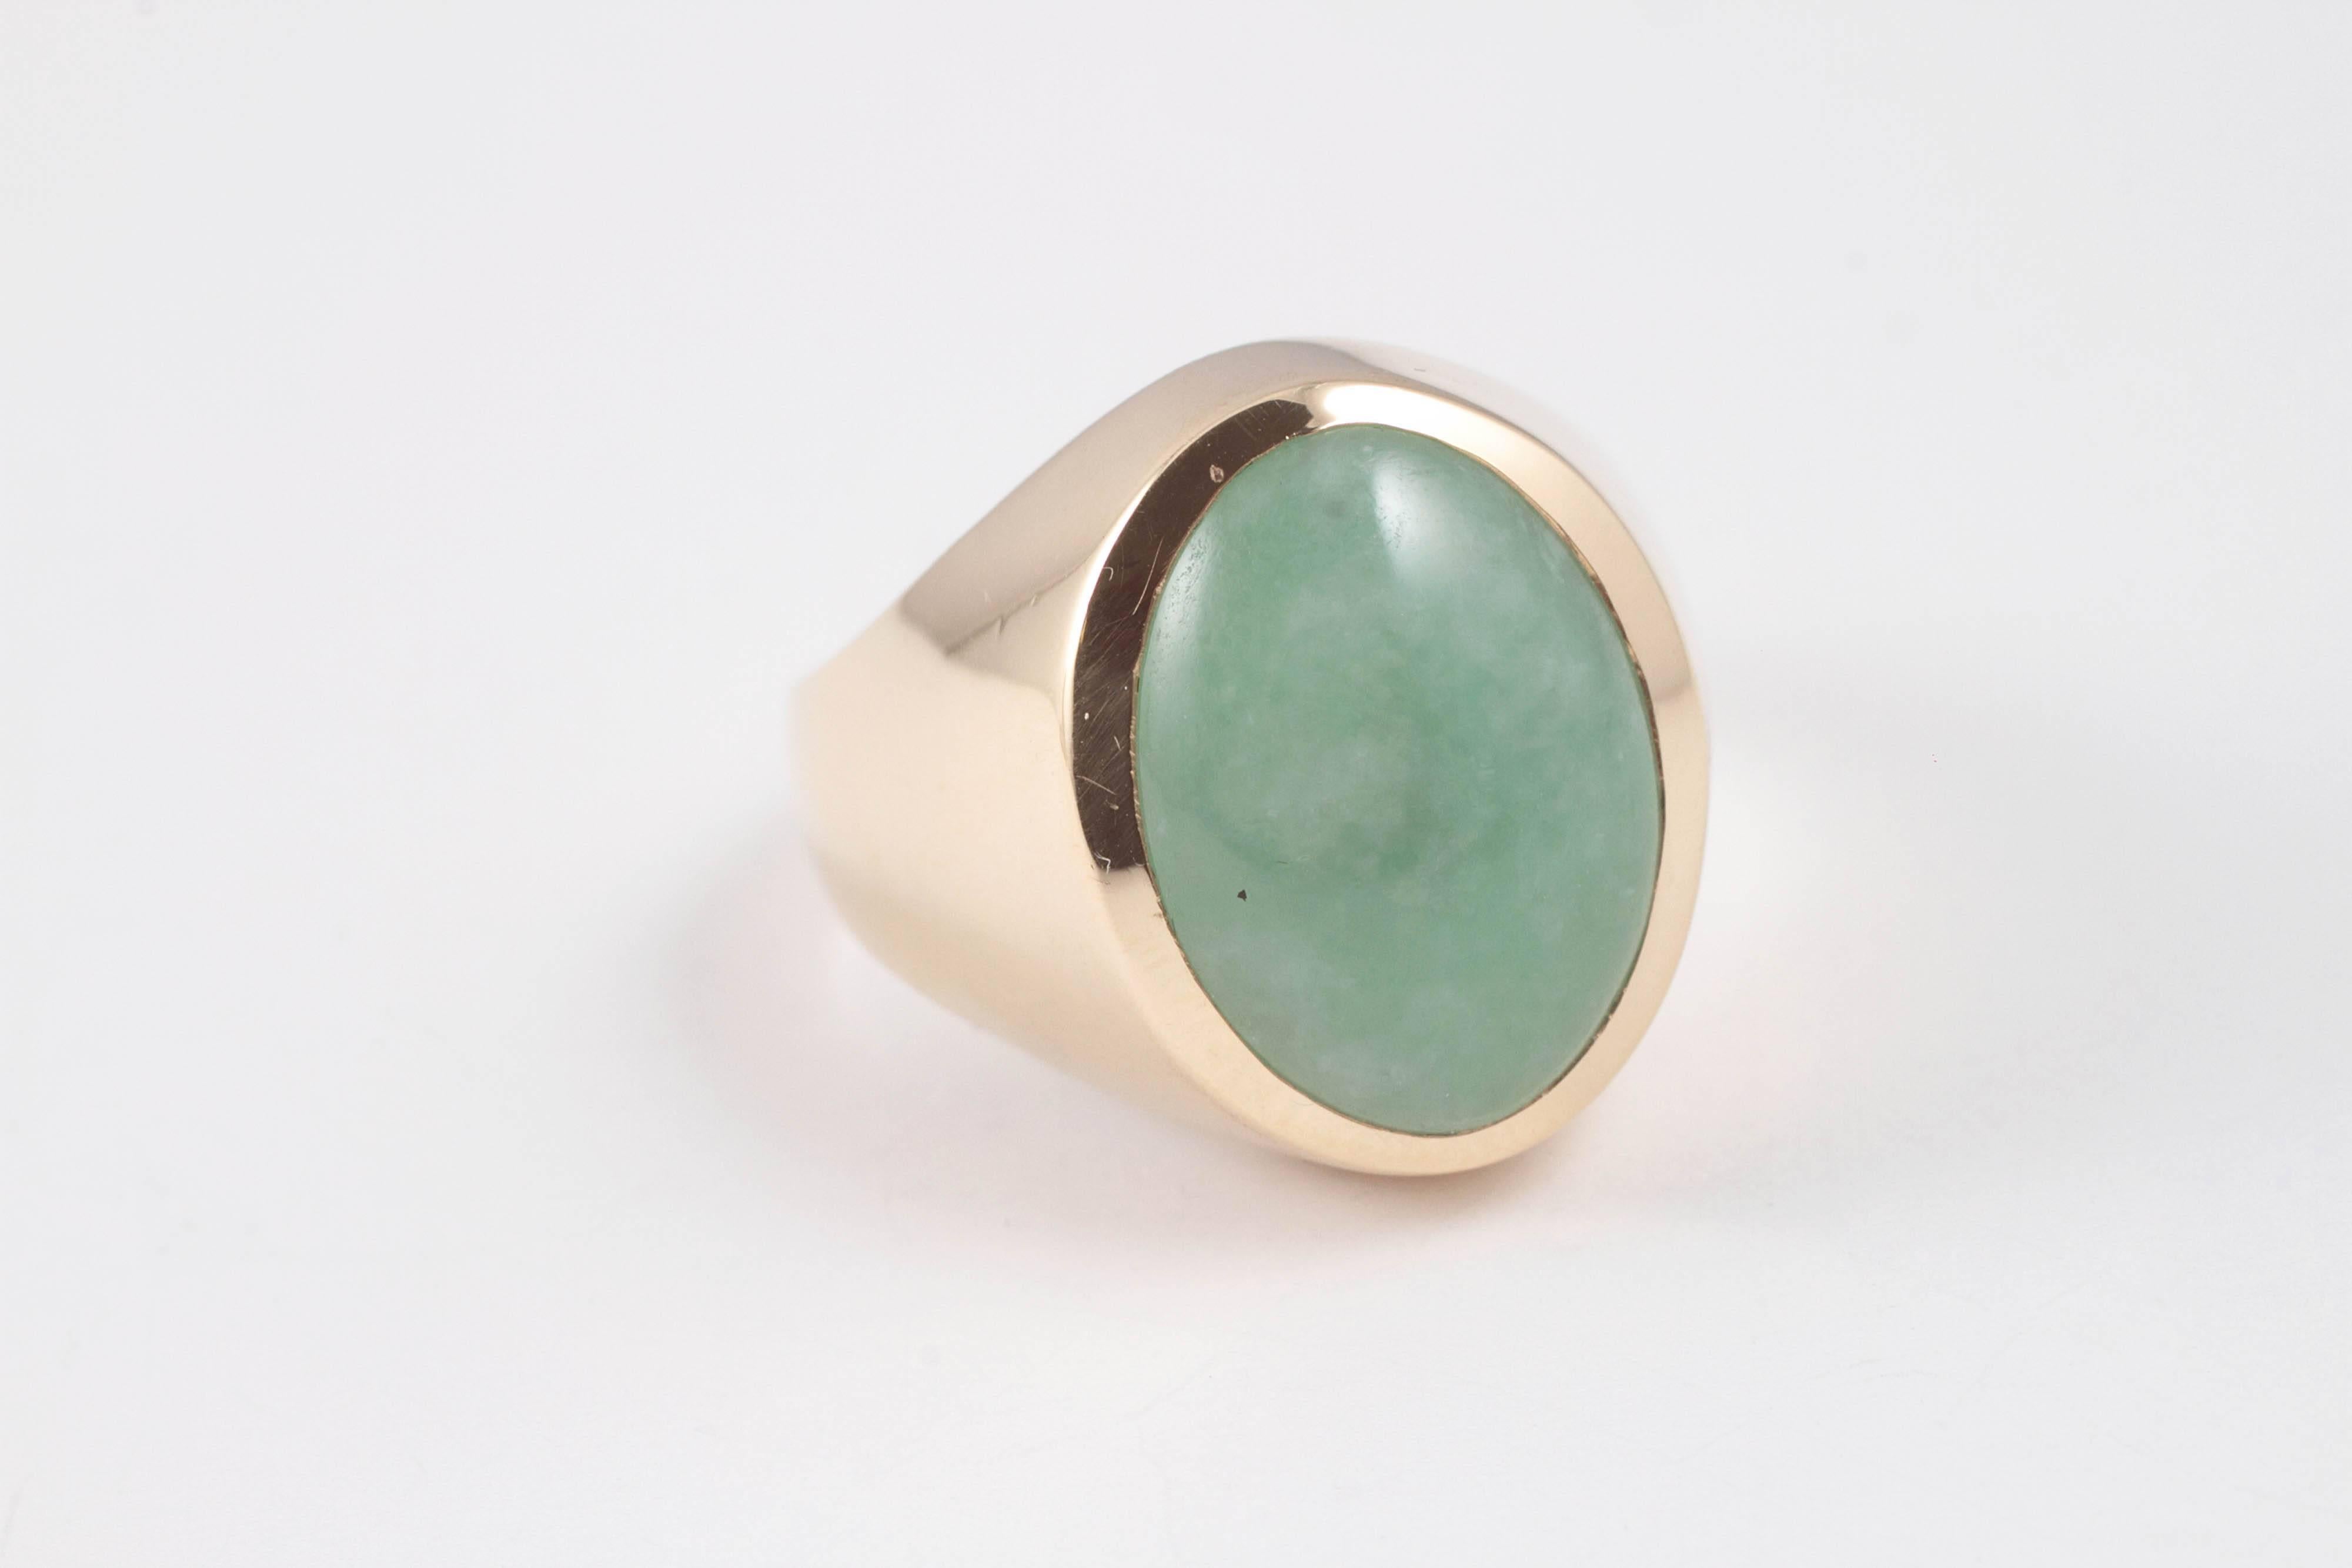 In 14 karat yellow gold, this lovely jade ring is accompanied by a Stone Group Laboratory report stating 